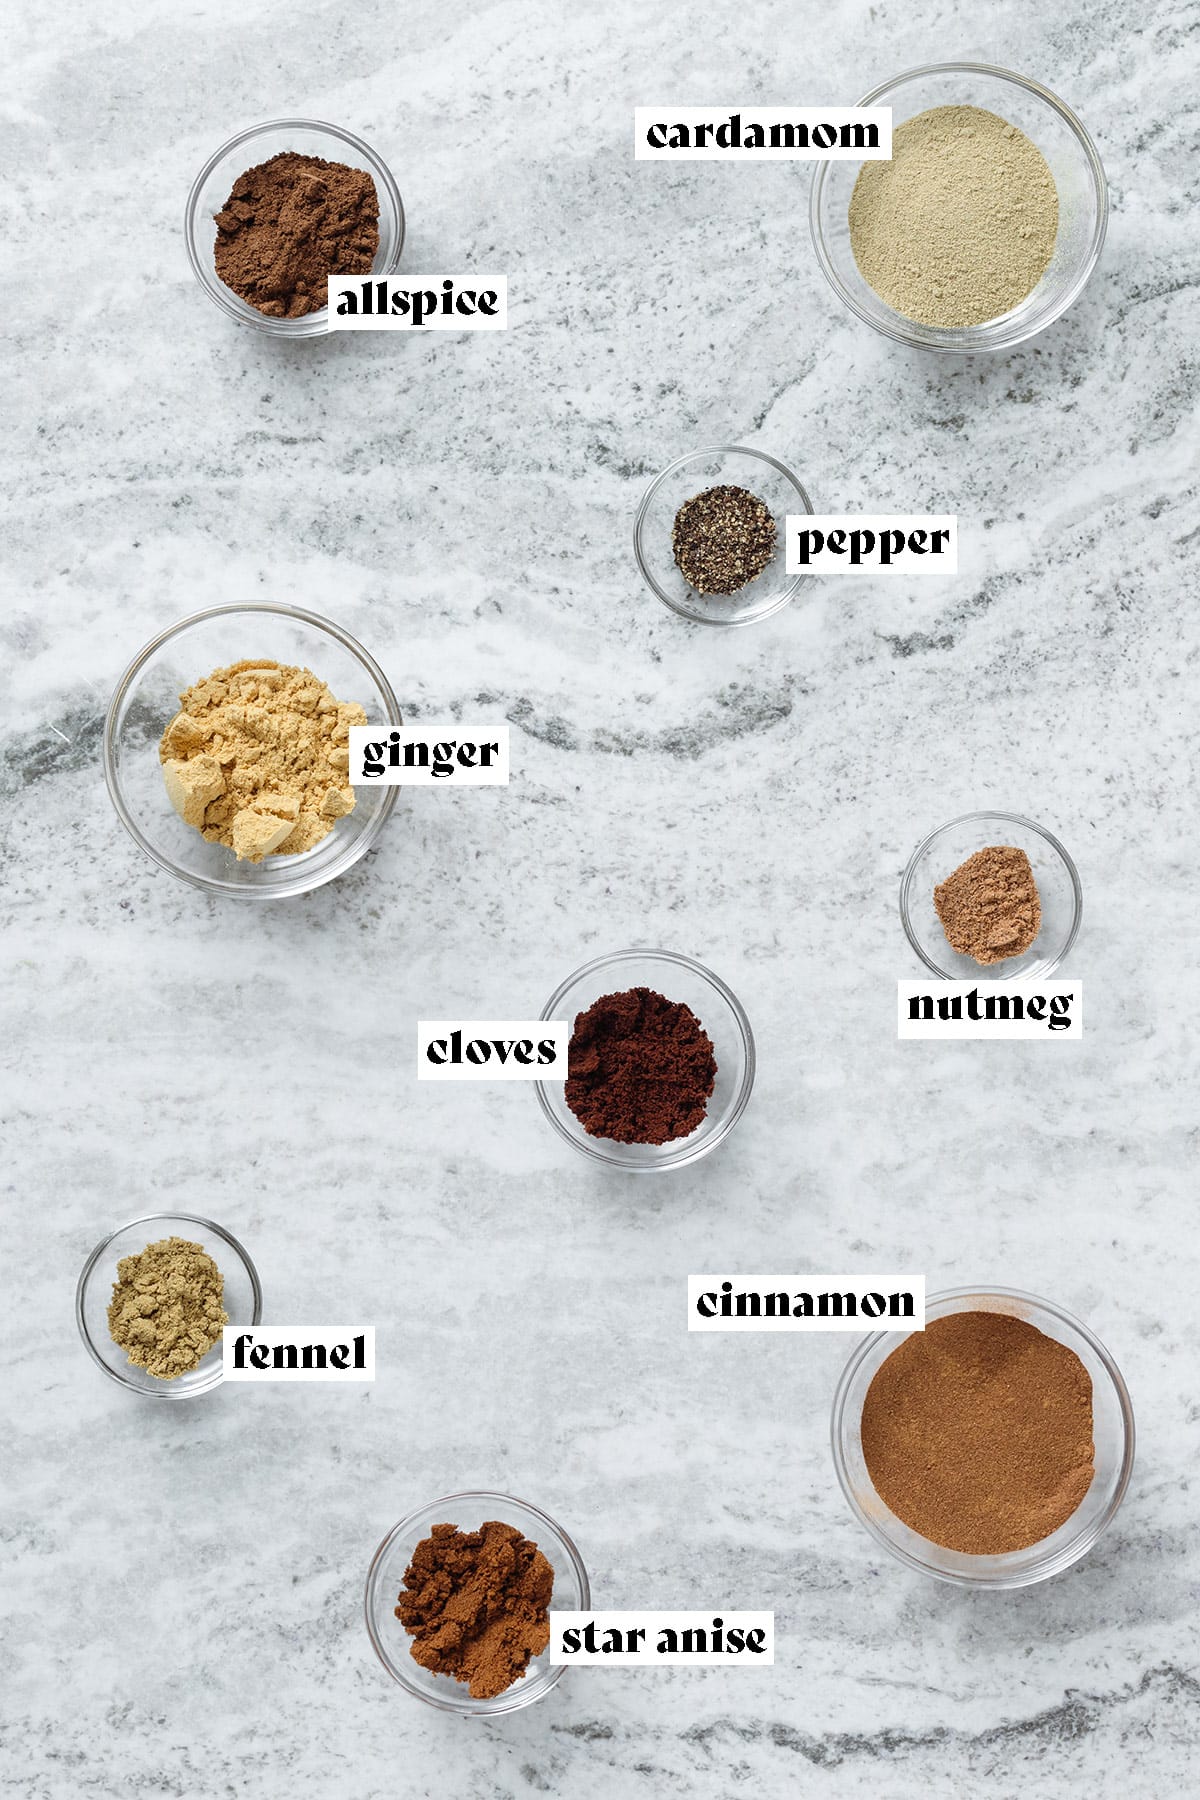 Ground spices measured out in glass bowls laid out on a grey stone background.